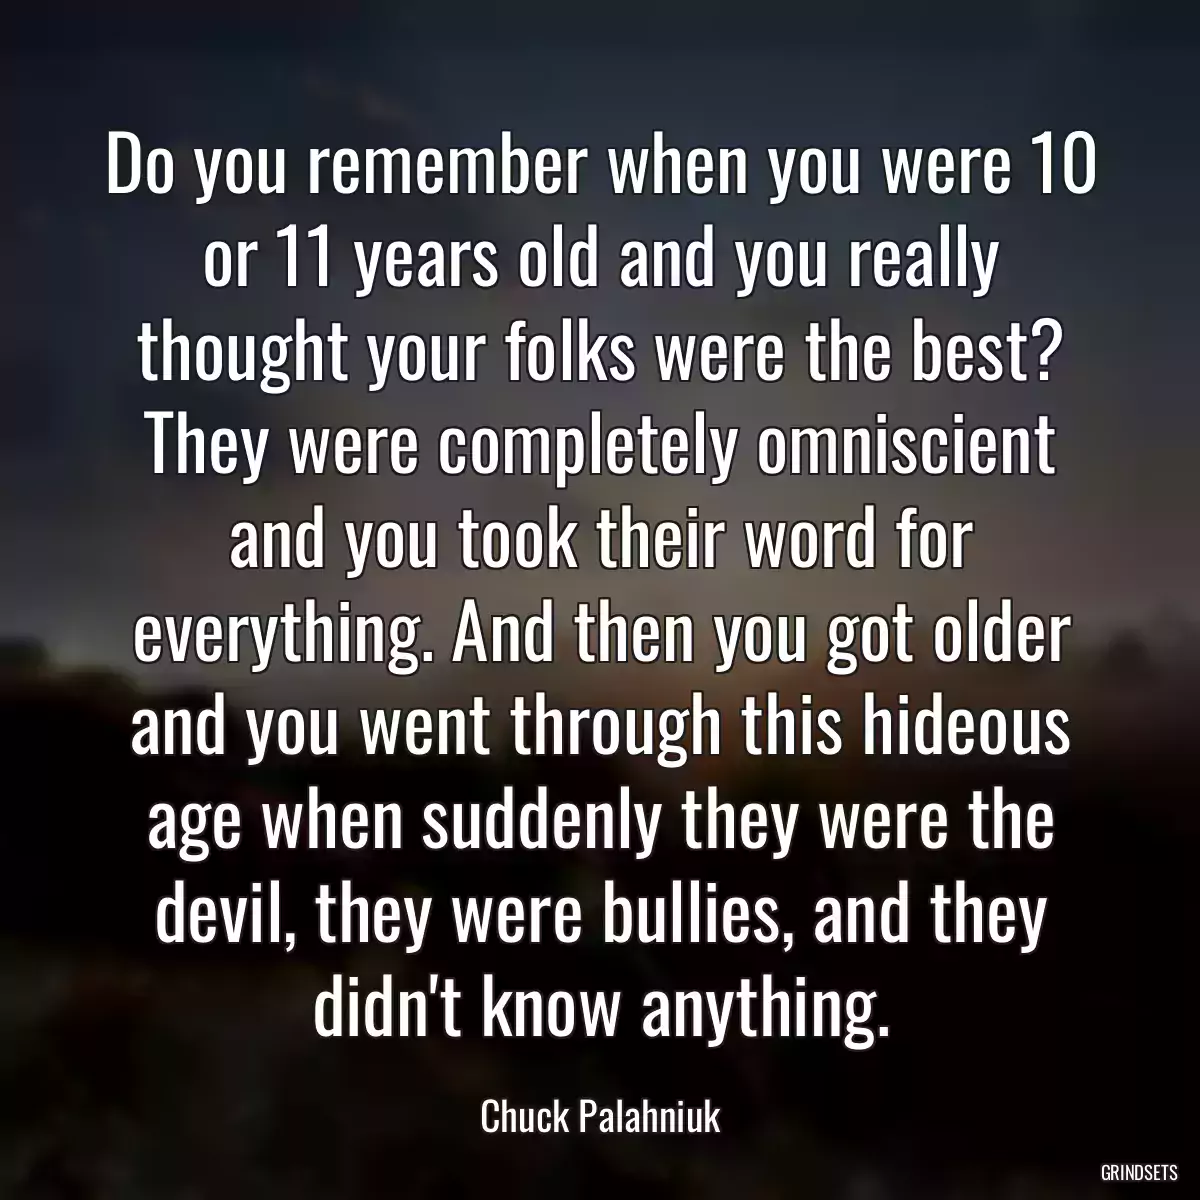 Do you remember when you were 10 or 11 years old and you really thought your folks were the best? They were completely omniscient and you took their word for everything. And then you got older and you went through this hideous age when suddenly they were the devil, they were bullies, and they didn\'t know anything.